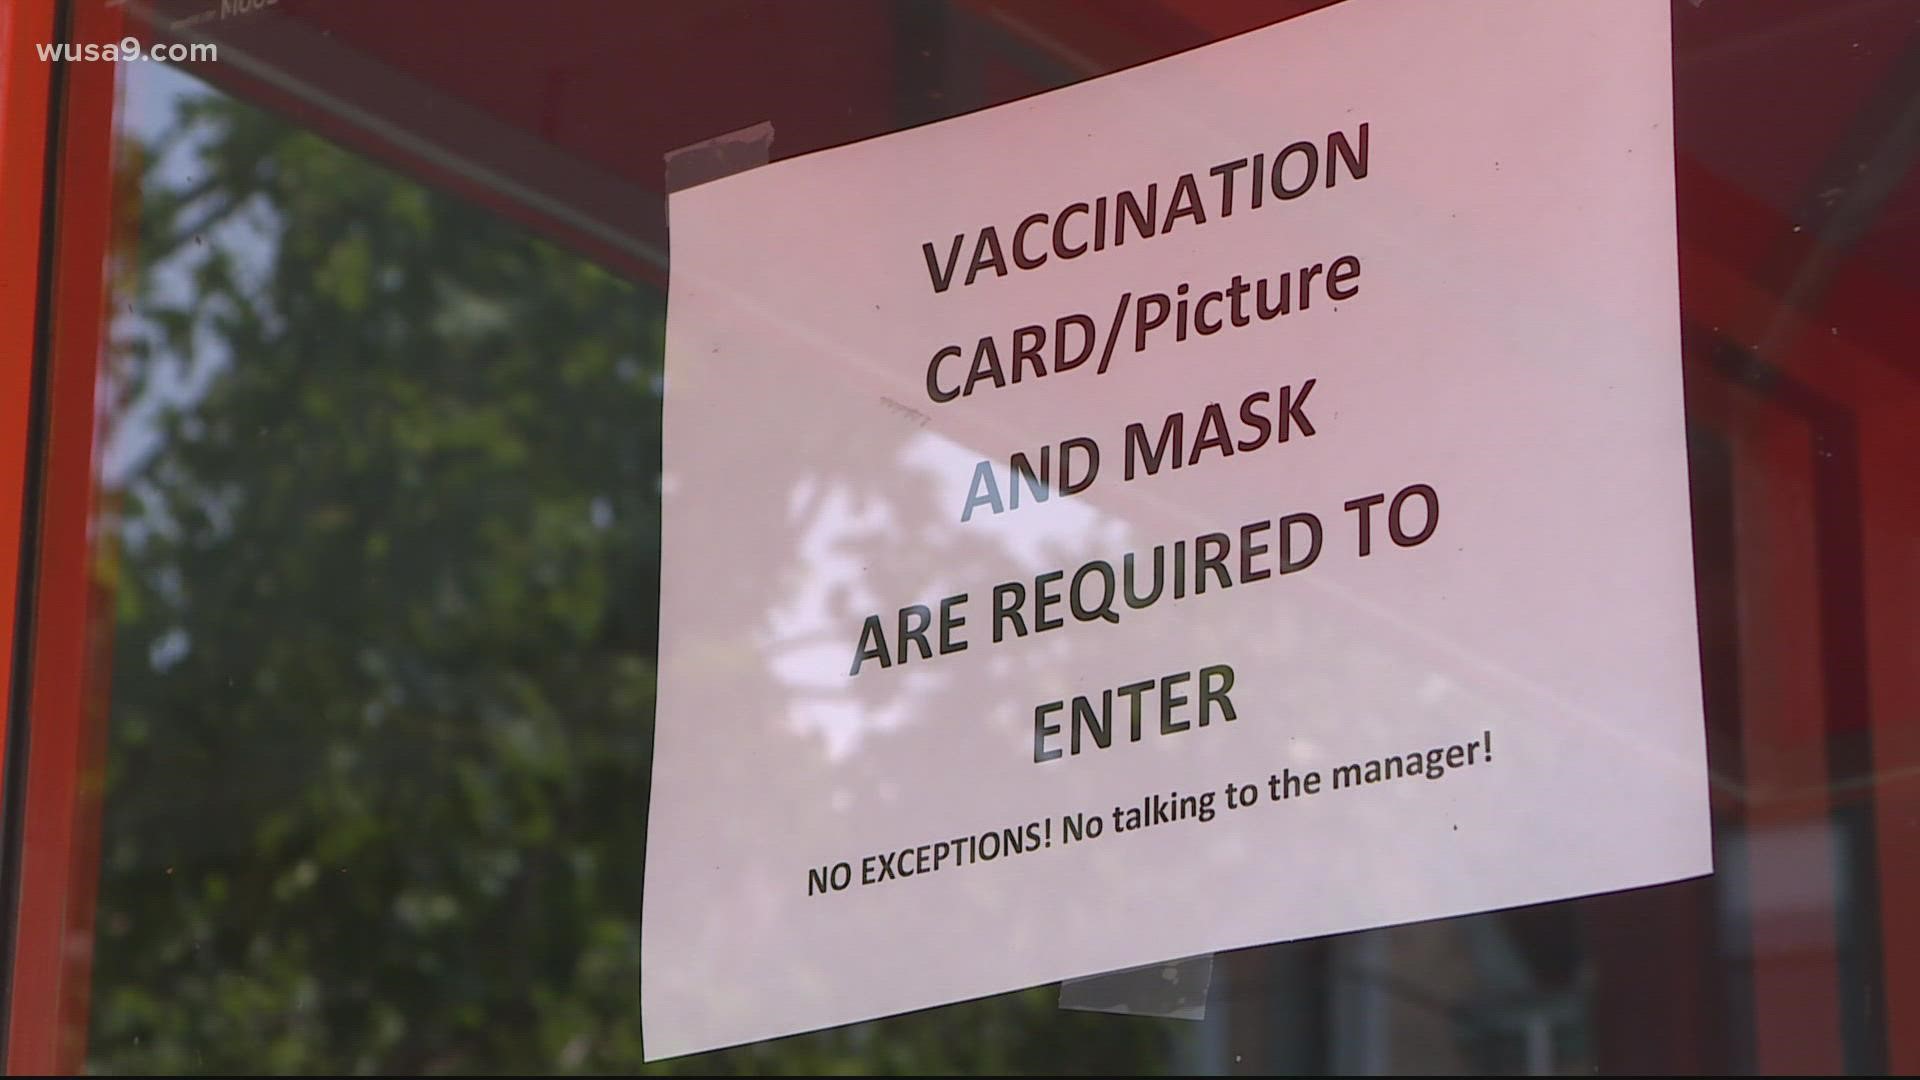 Several restaurants and bars have announced their vaccination policy ahead of the new mask mandate in D.C.